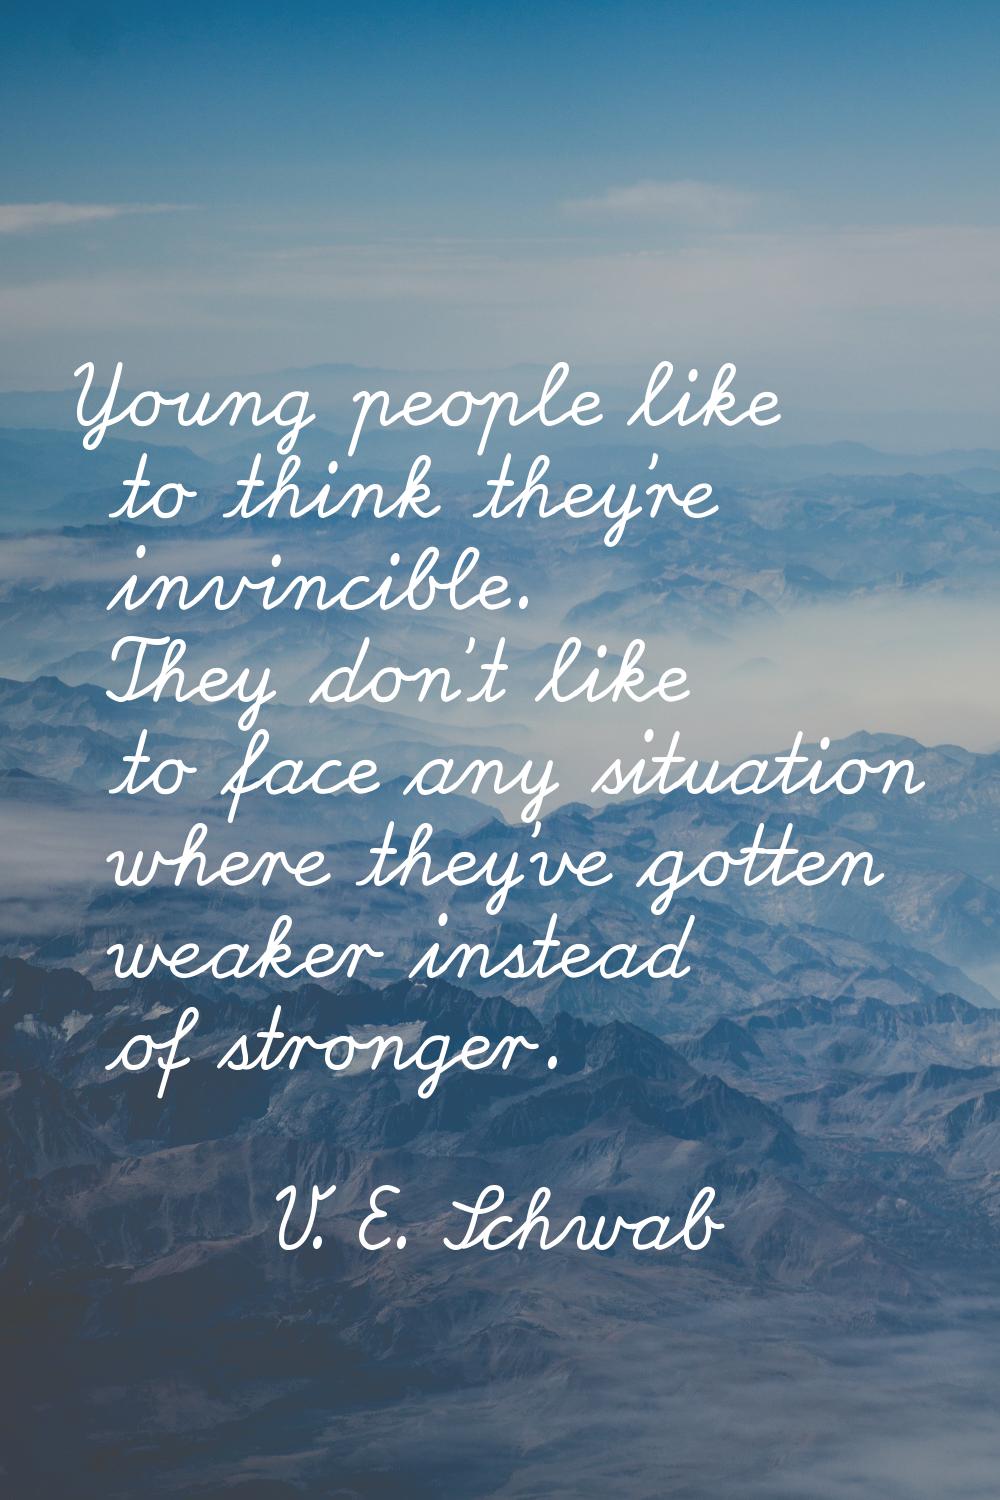 Young people like to think they're invincible. They don't like to face any situation where they've 